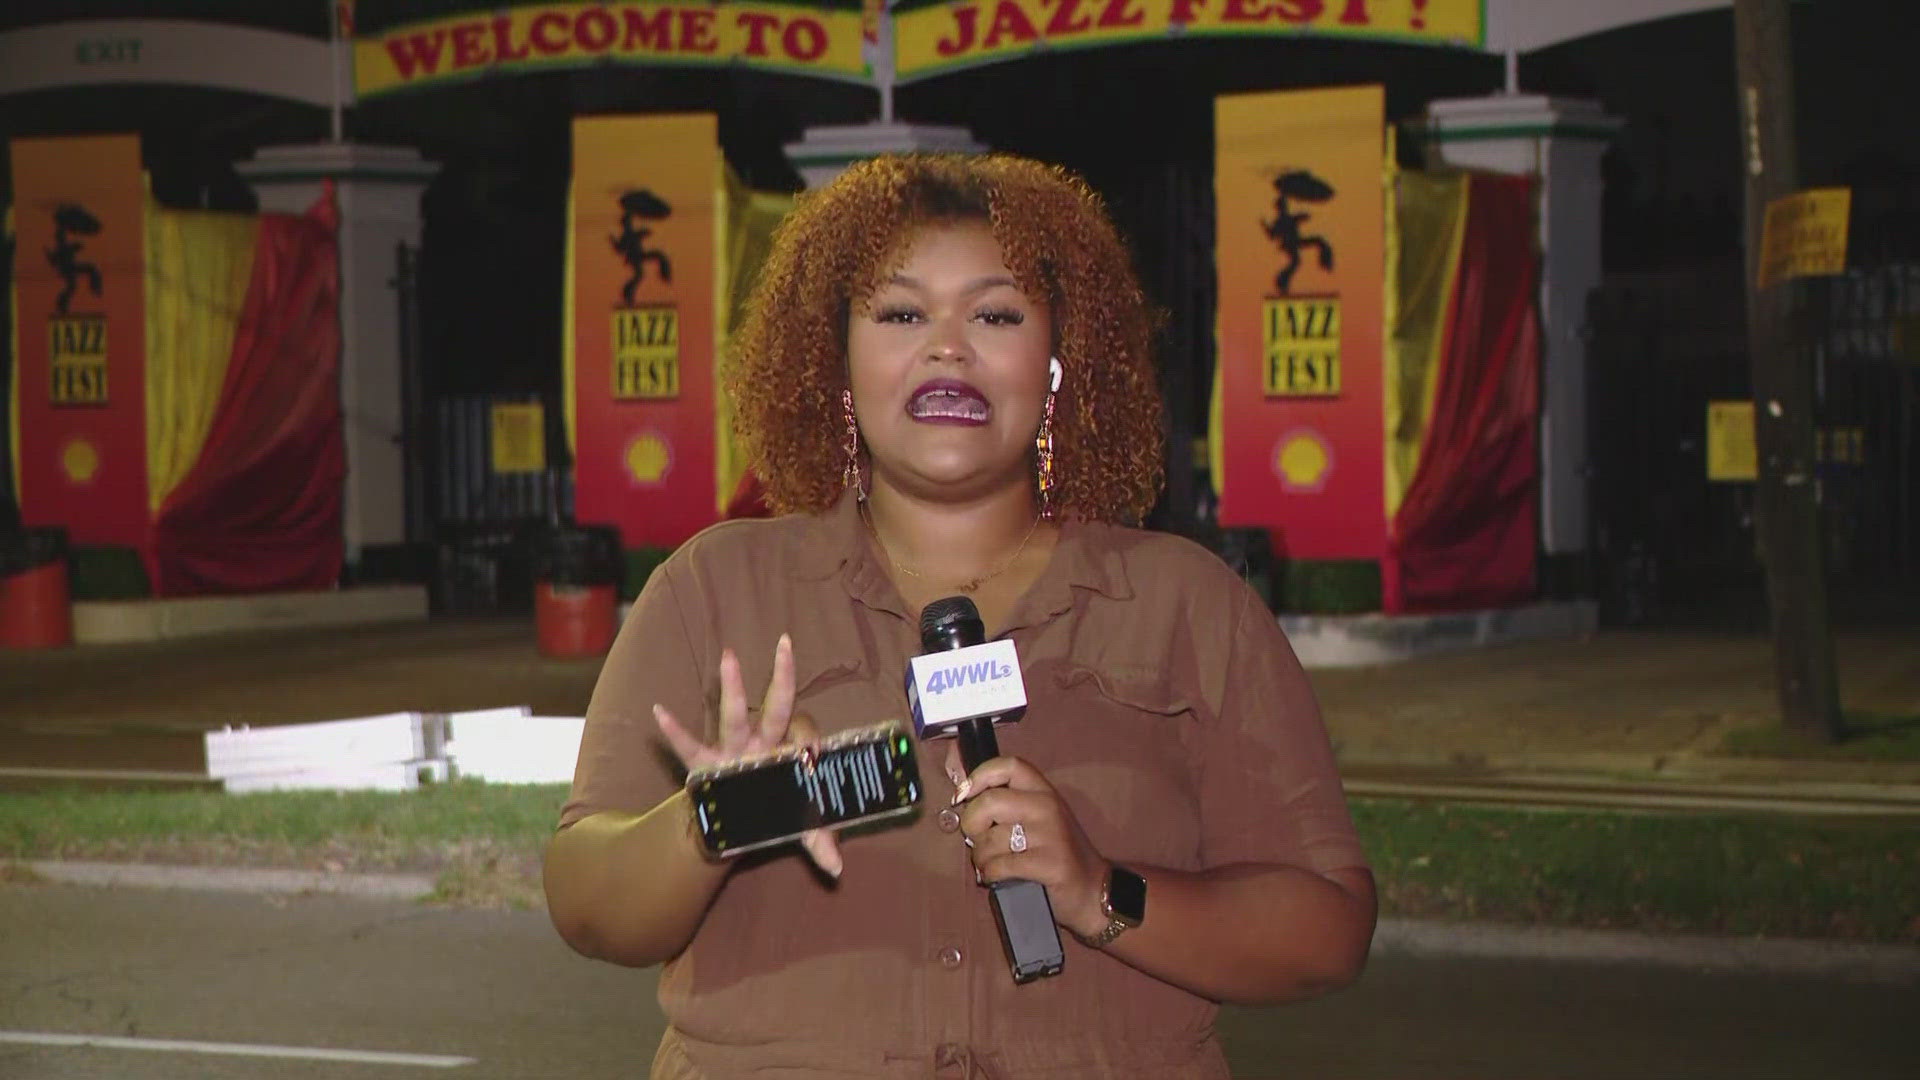 WWL Louisiana has an early access preview of what to expect at Jazz Fest first weekend.